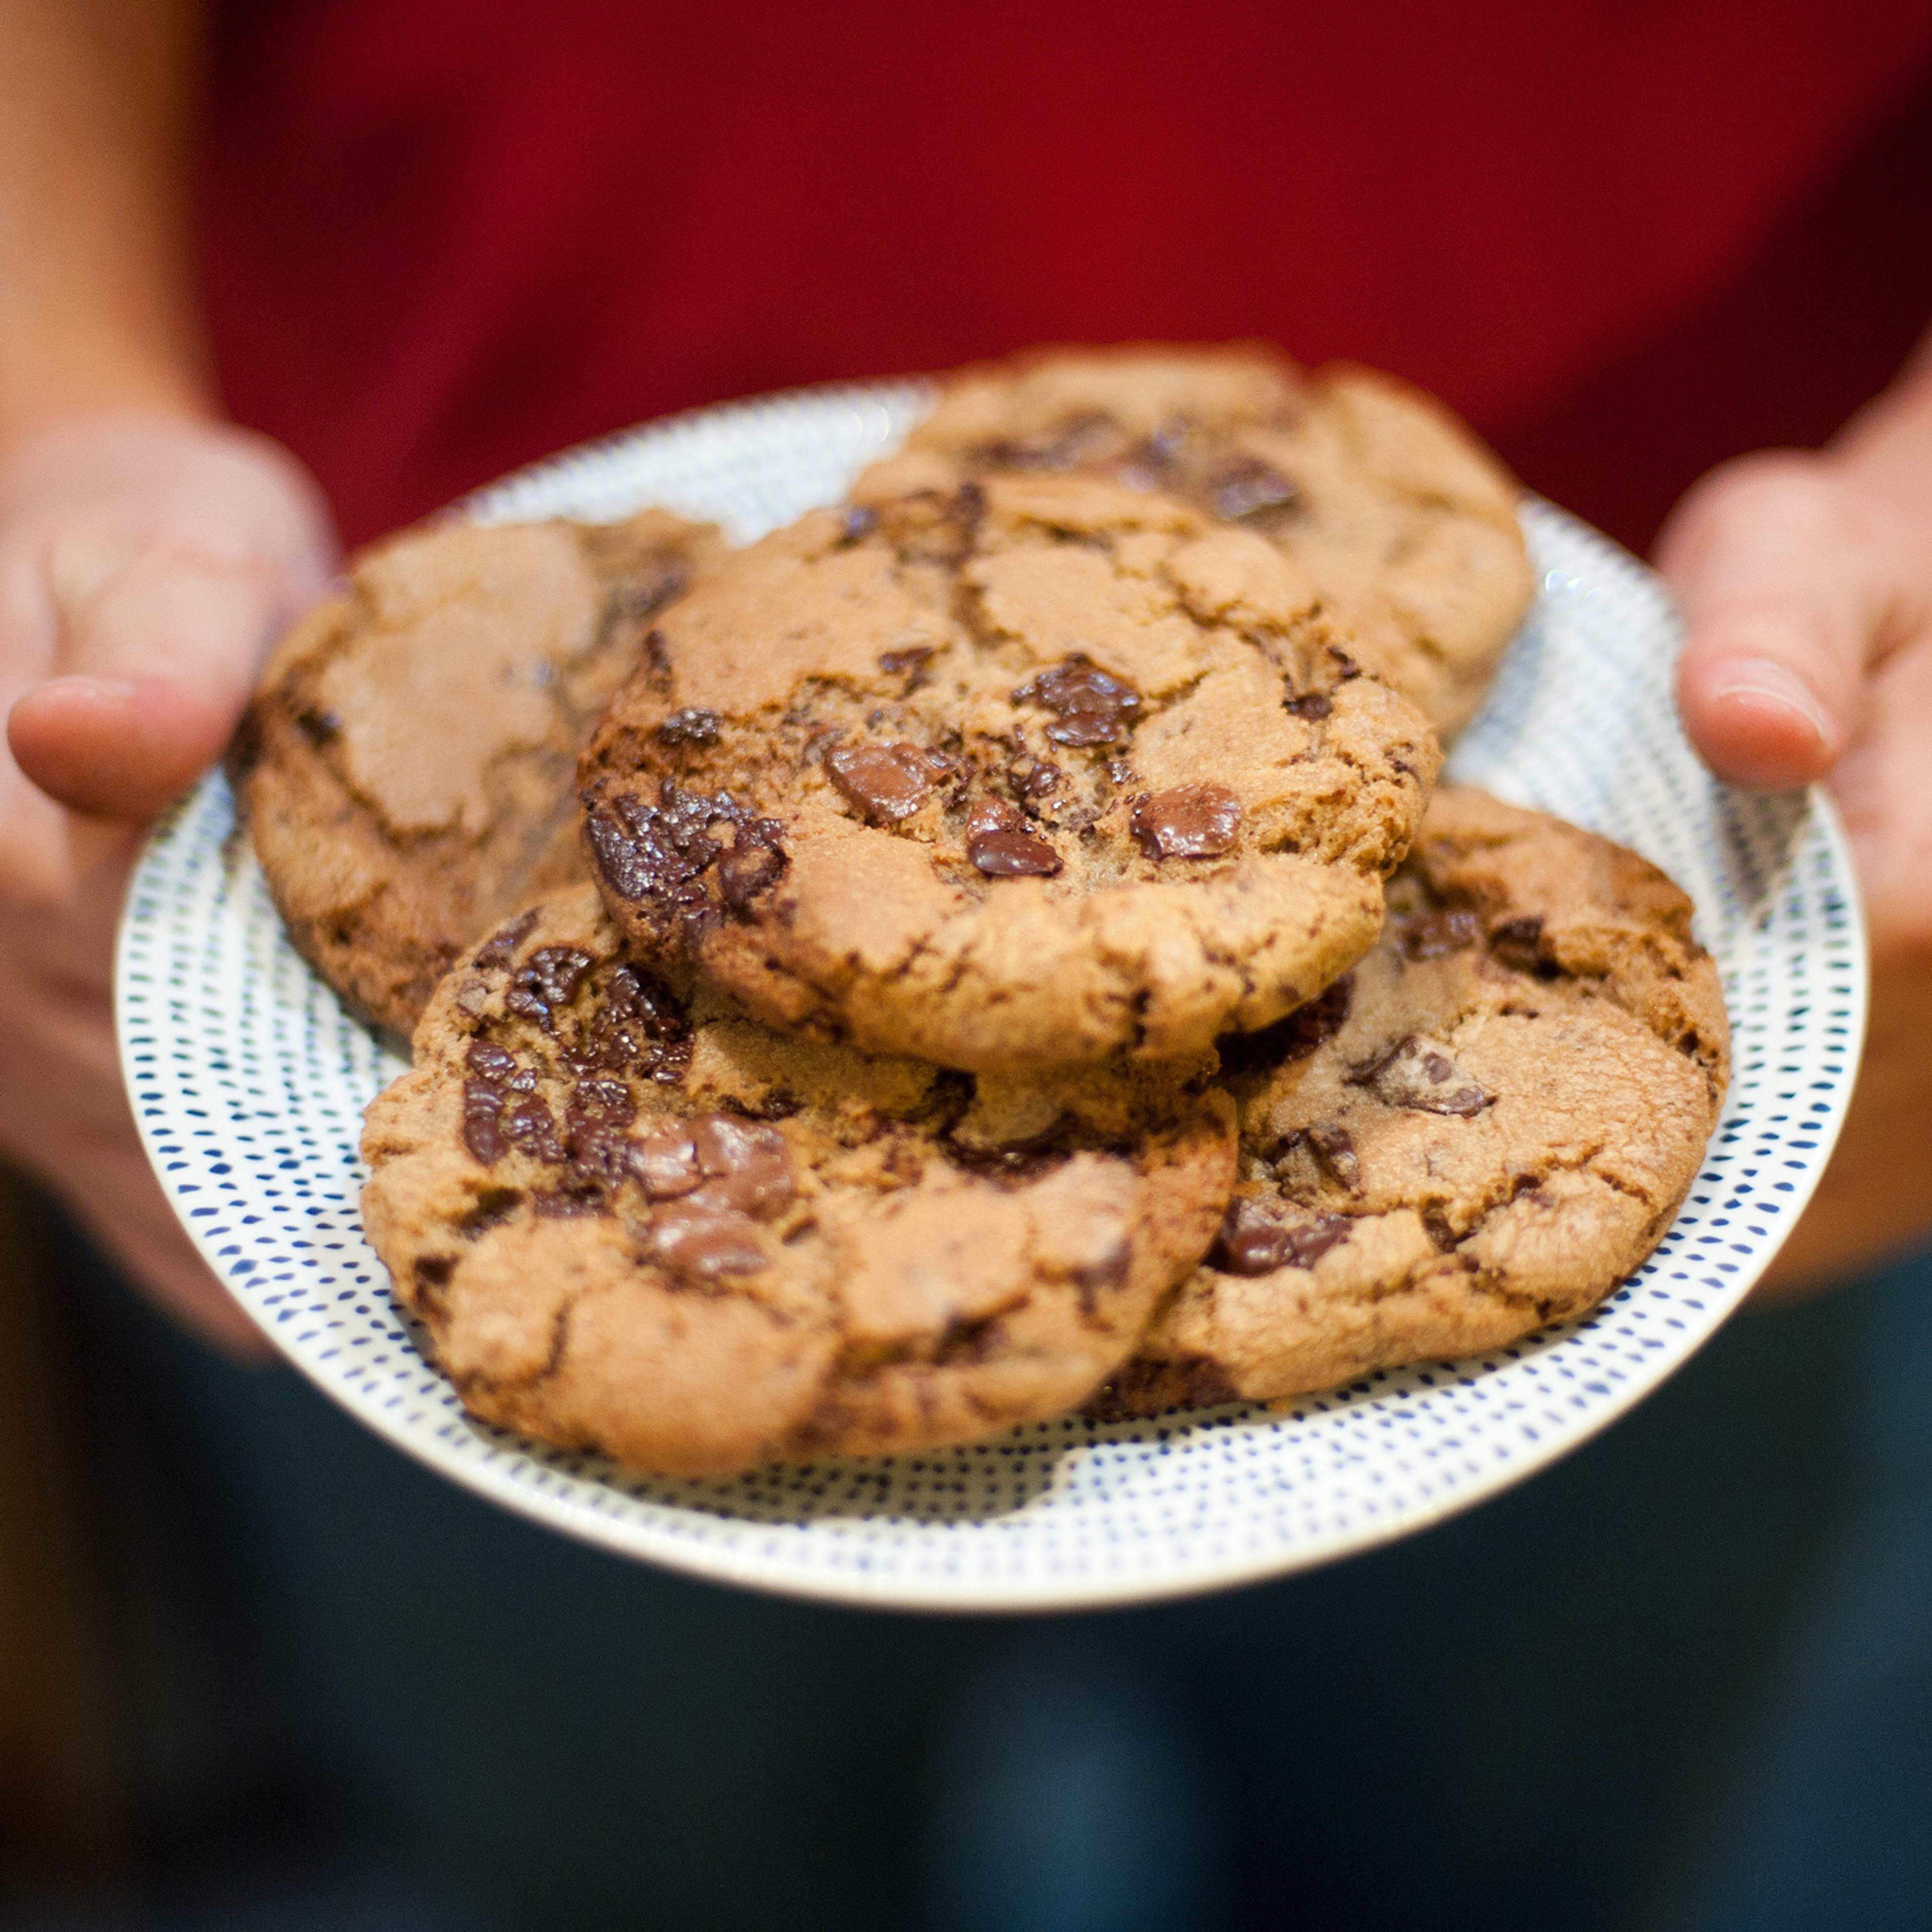 A child is offering a plate of homemade cookies